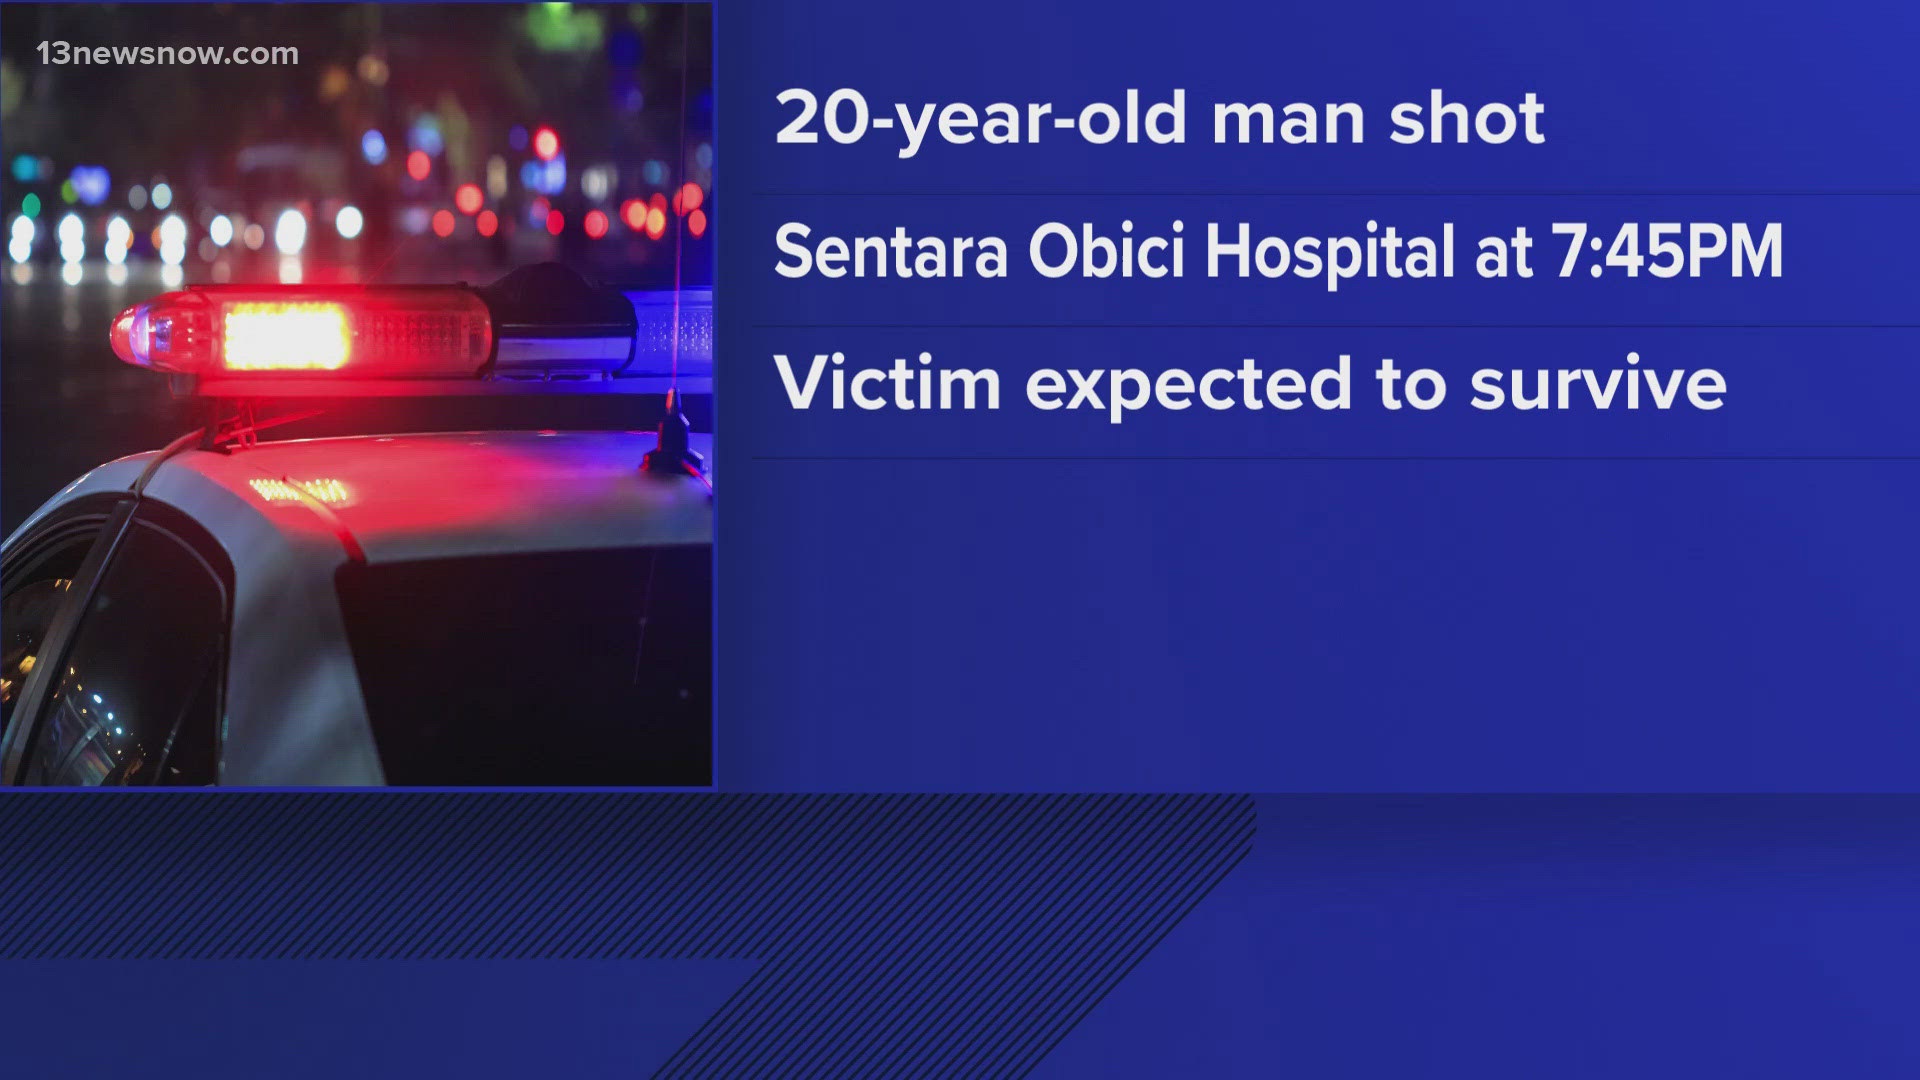 Suffolk police are investigating a shooting after a gunshot victim showed up at a hospital.